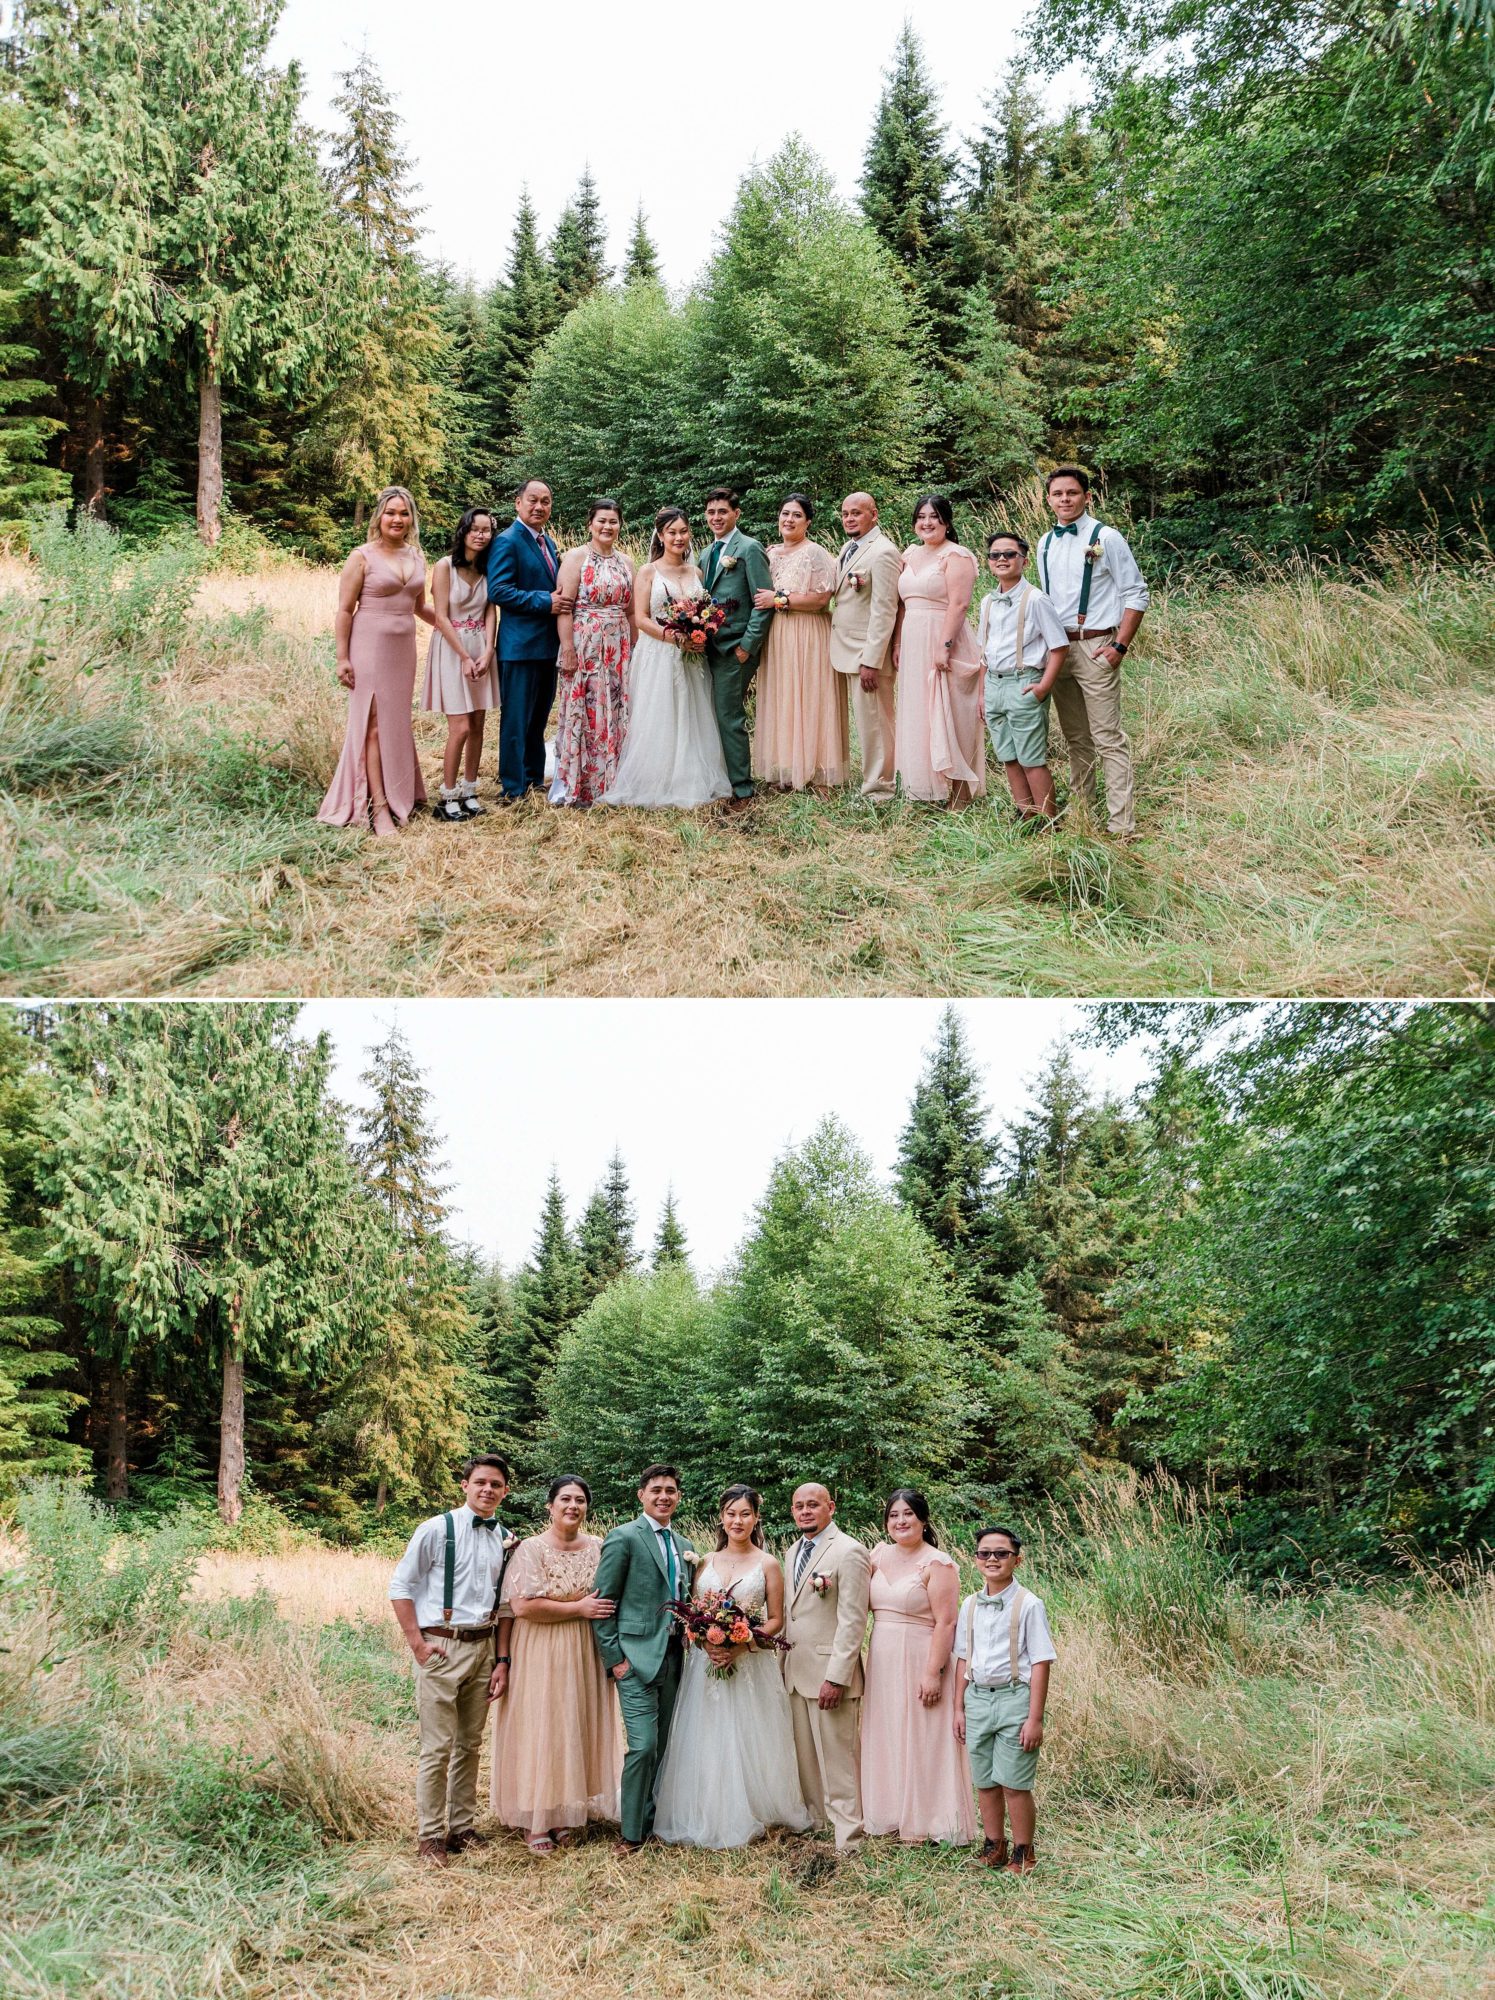 Family portraits in a meadow at Misty Clover Farm Olympic Peninsula Wedding Venue